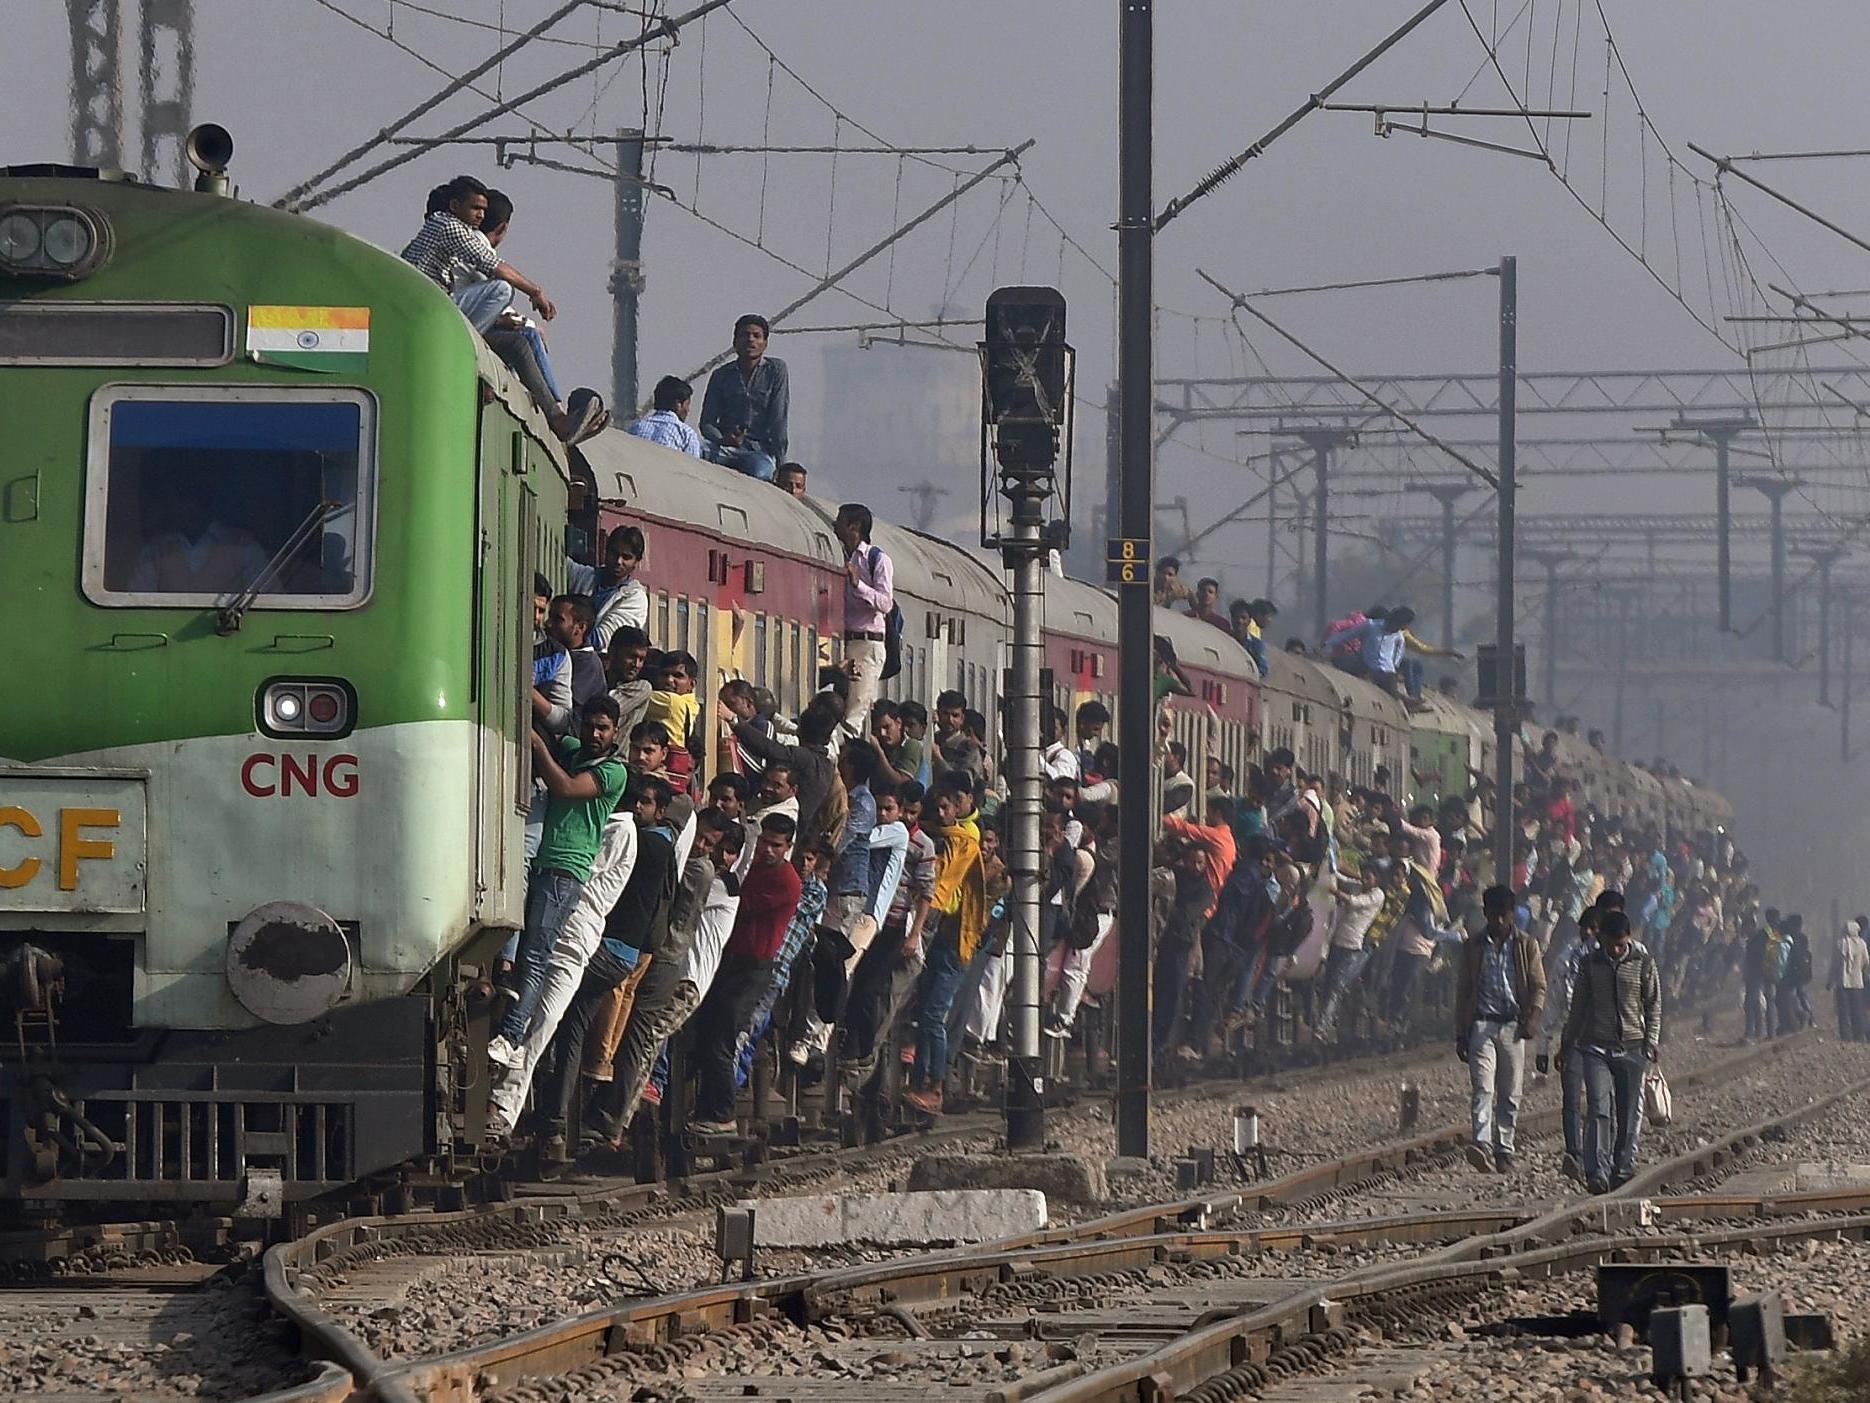 India's population is forecast to increase to 1.5 billion by 2050